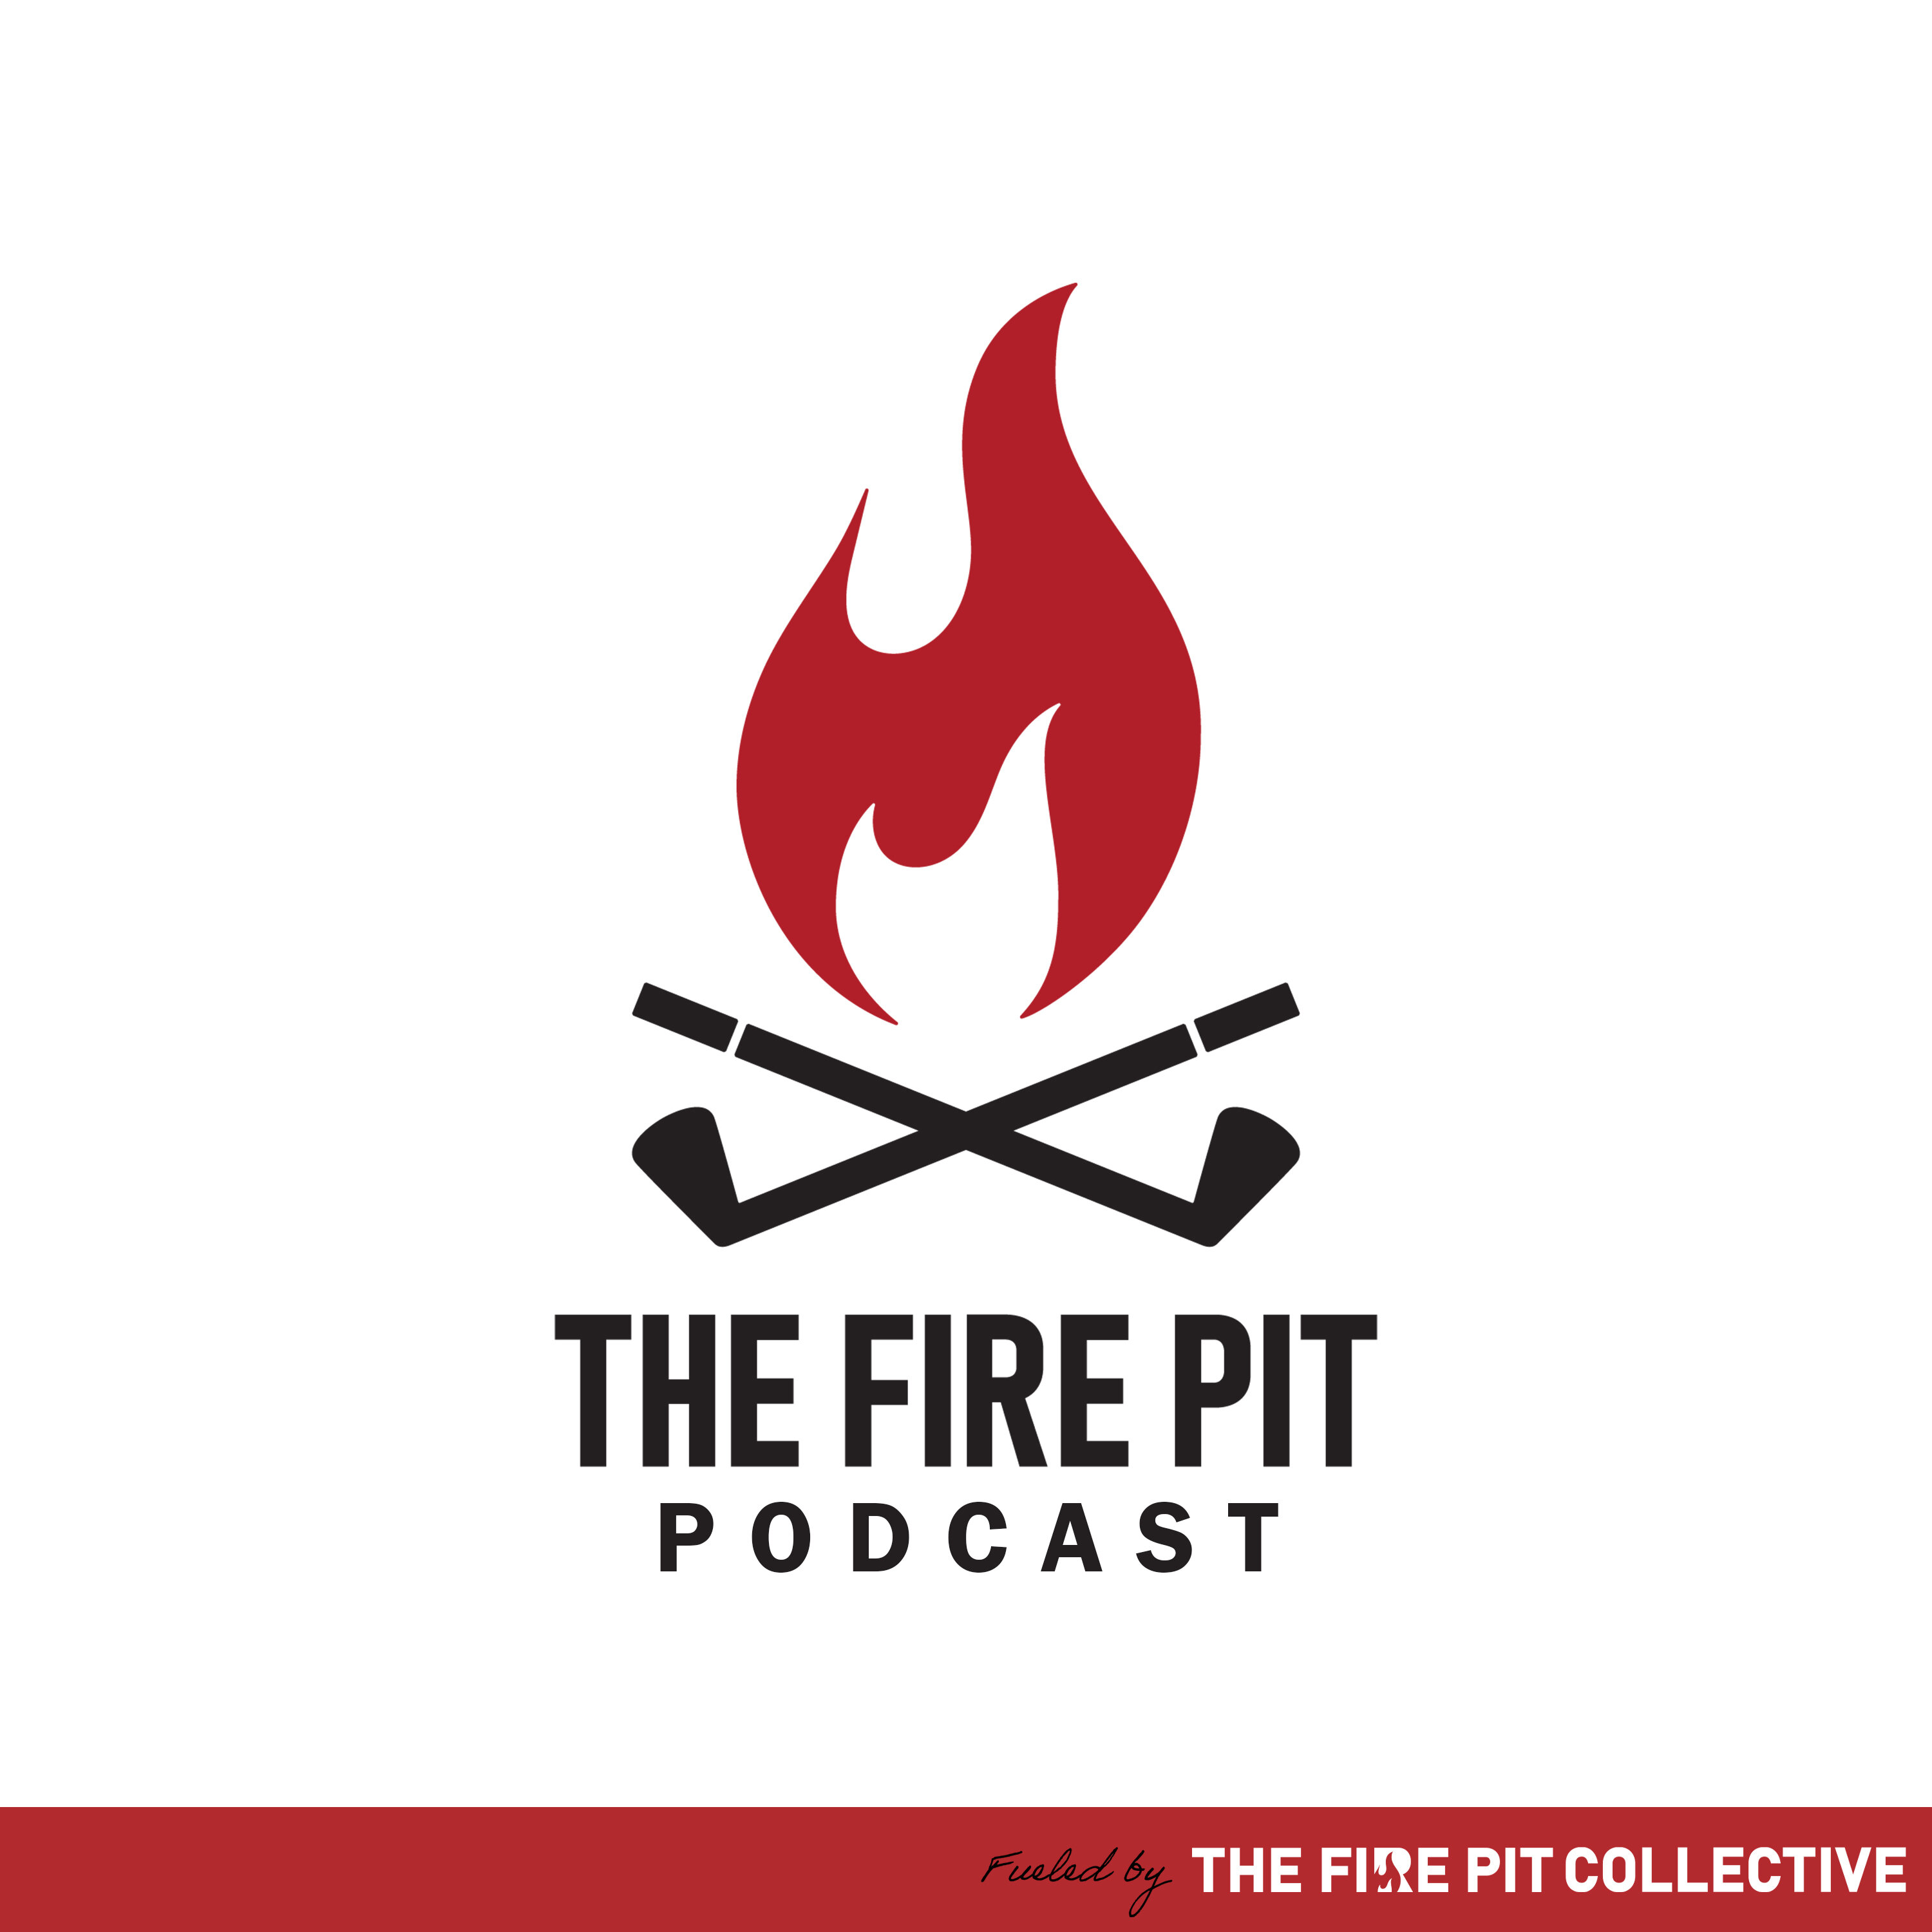 The Fire Pit Podcast podcast show image